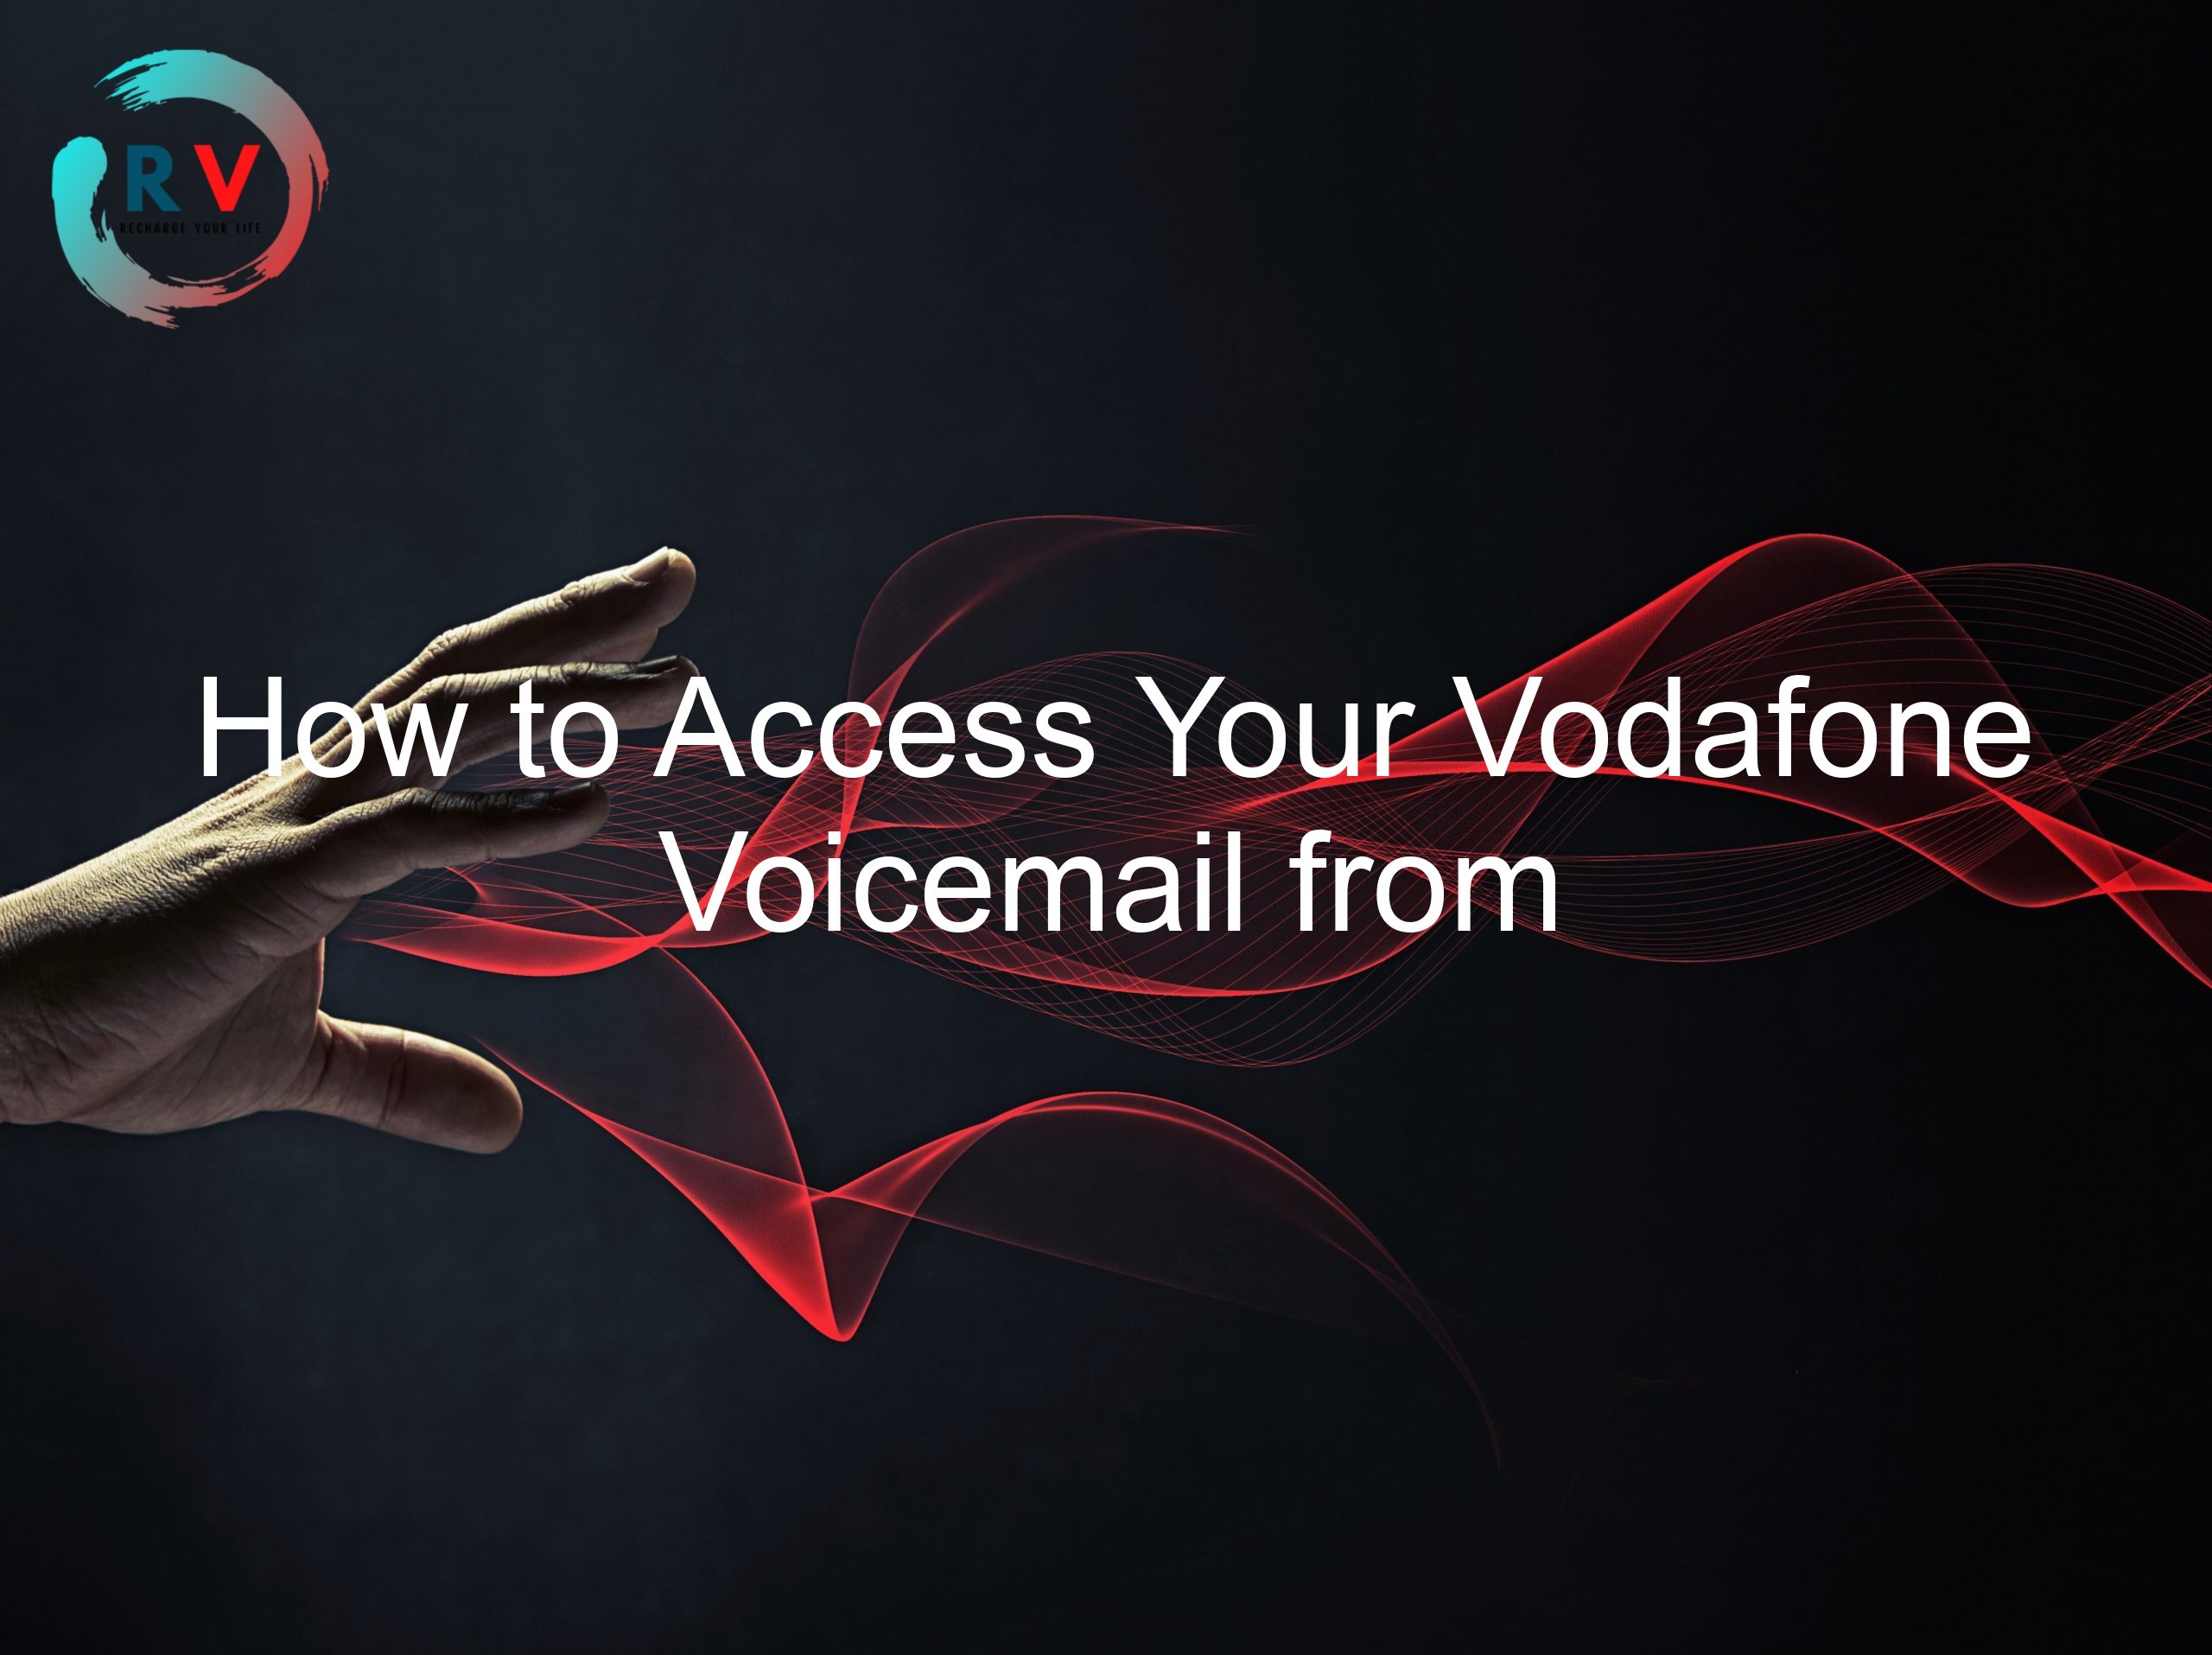 How to Access Your Vodafone Voicemail from Another Phone